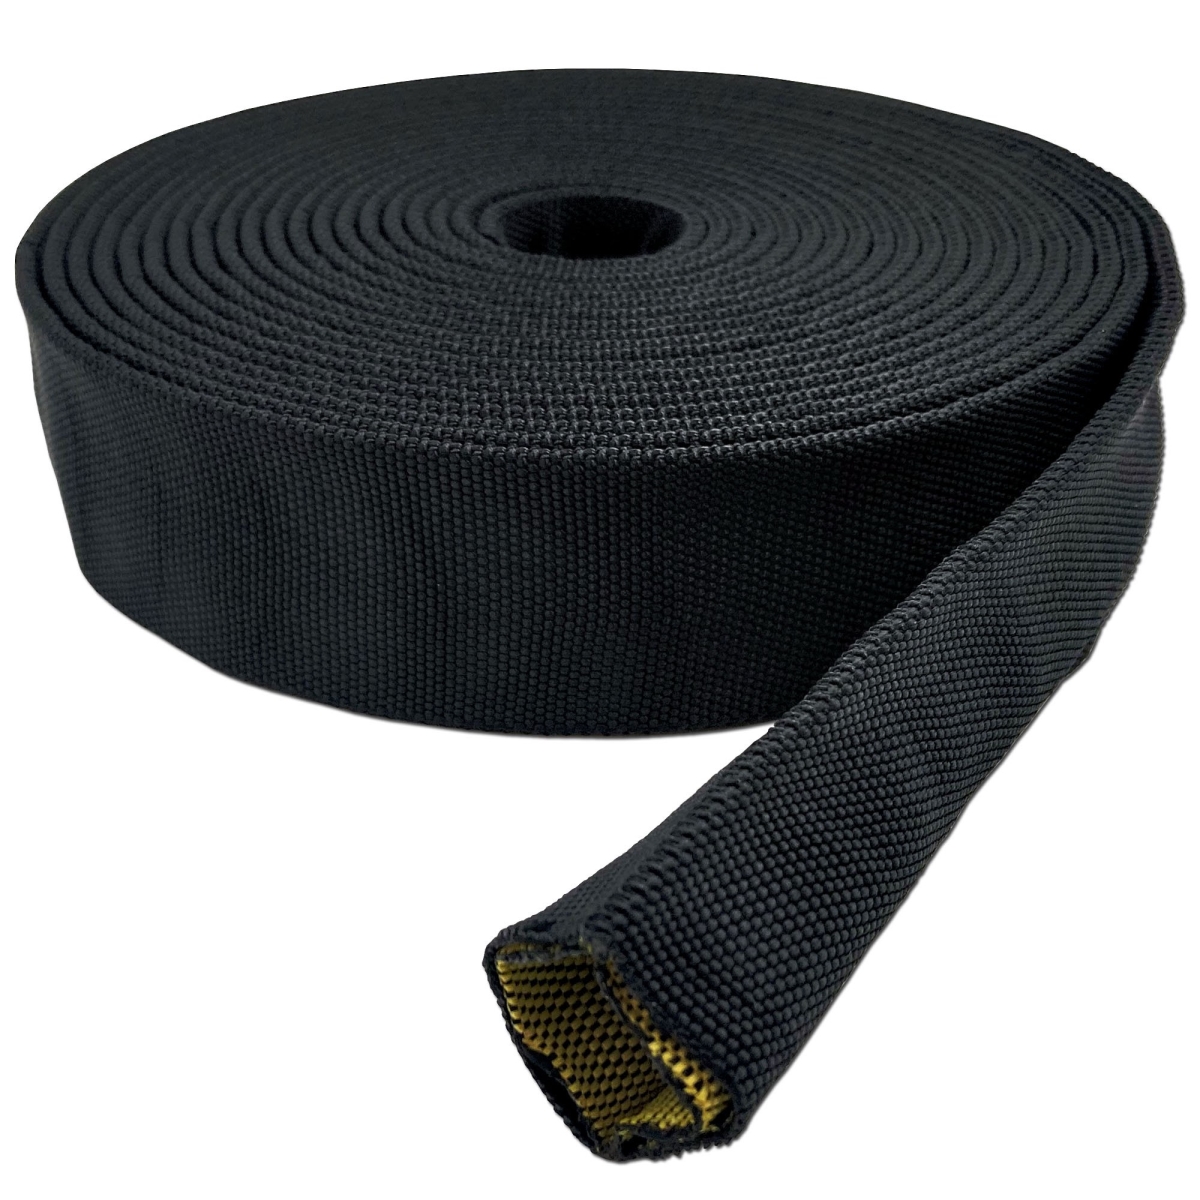 Picture of Electriduct BS-J-BURST-250-25-BK 2.5 in. x 25 ft. Burst Protection Multifilament Nylon Braided Sleeving - Black